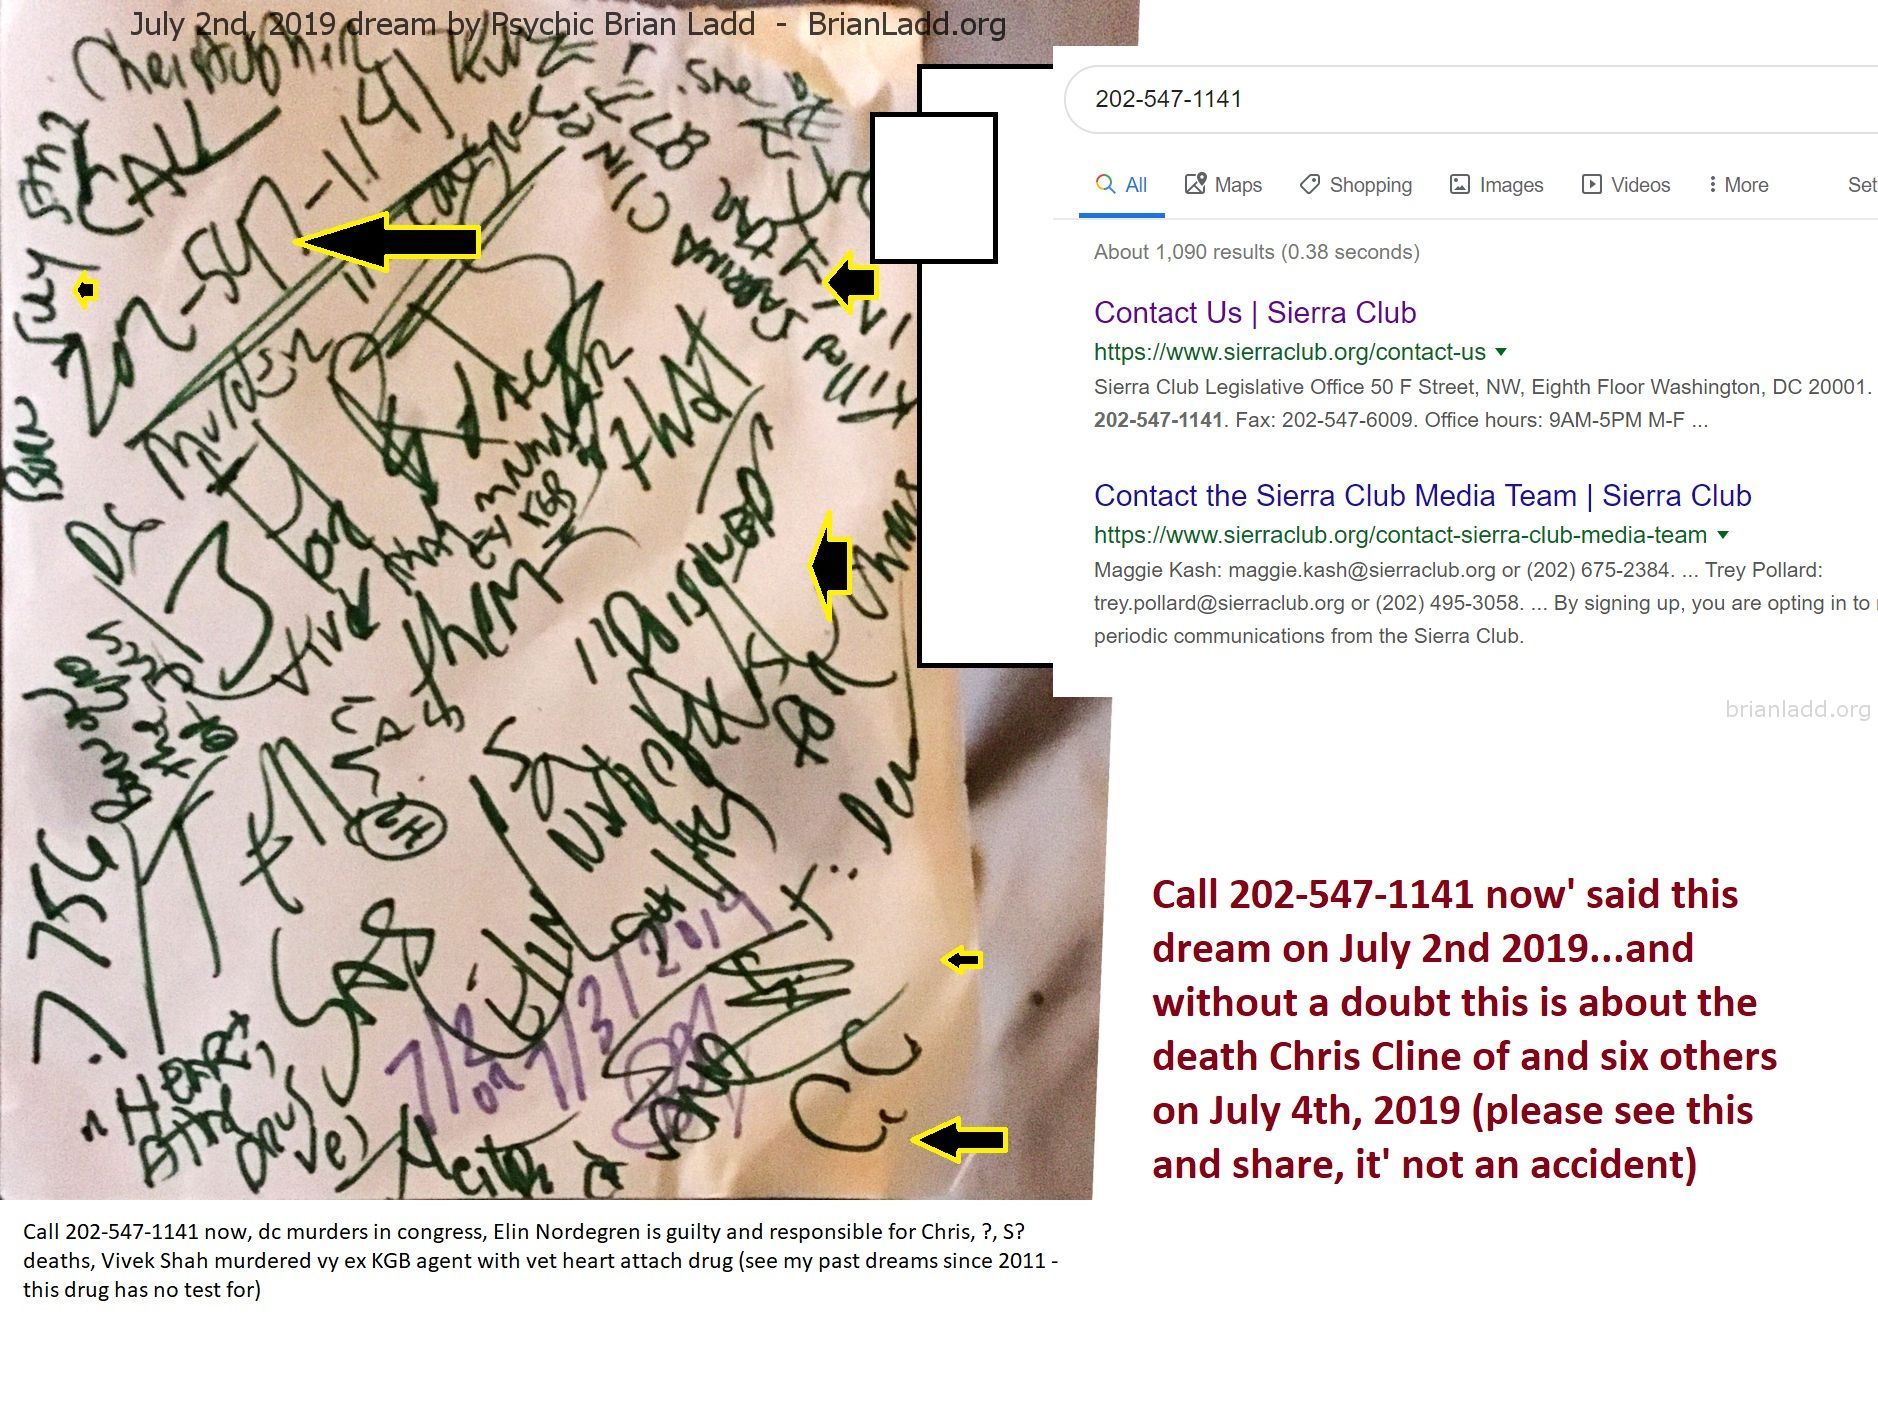 Call 202 547 1141 Now Said This Dream On July 2Nd 2019 And Without A Doubt This Is About The Death Chris Cline Of And Si...
Call 202-547-1141 Now' Said This Dream On July 2nd 2019...And Without A Doubt This Is About The Death Chris Cline Of And Six Others On July 4th, 2019 (please See This And Share, It' Not An Accident)   https://Www.Sierraclub.Org/Contact-Us
